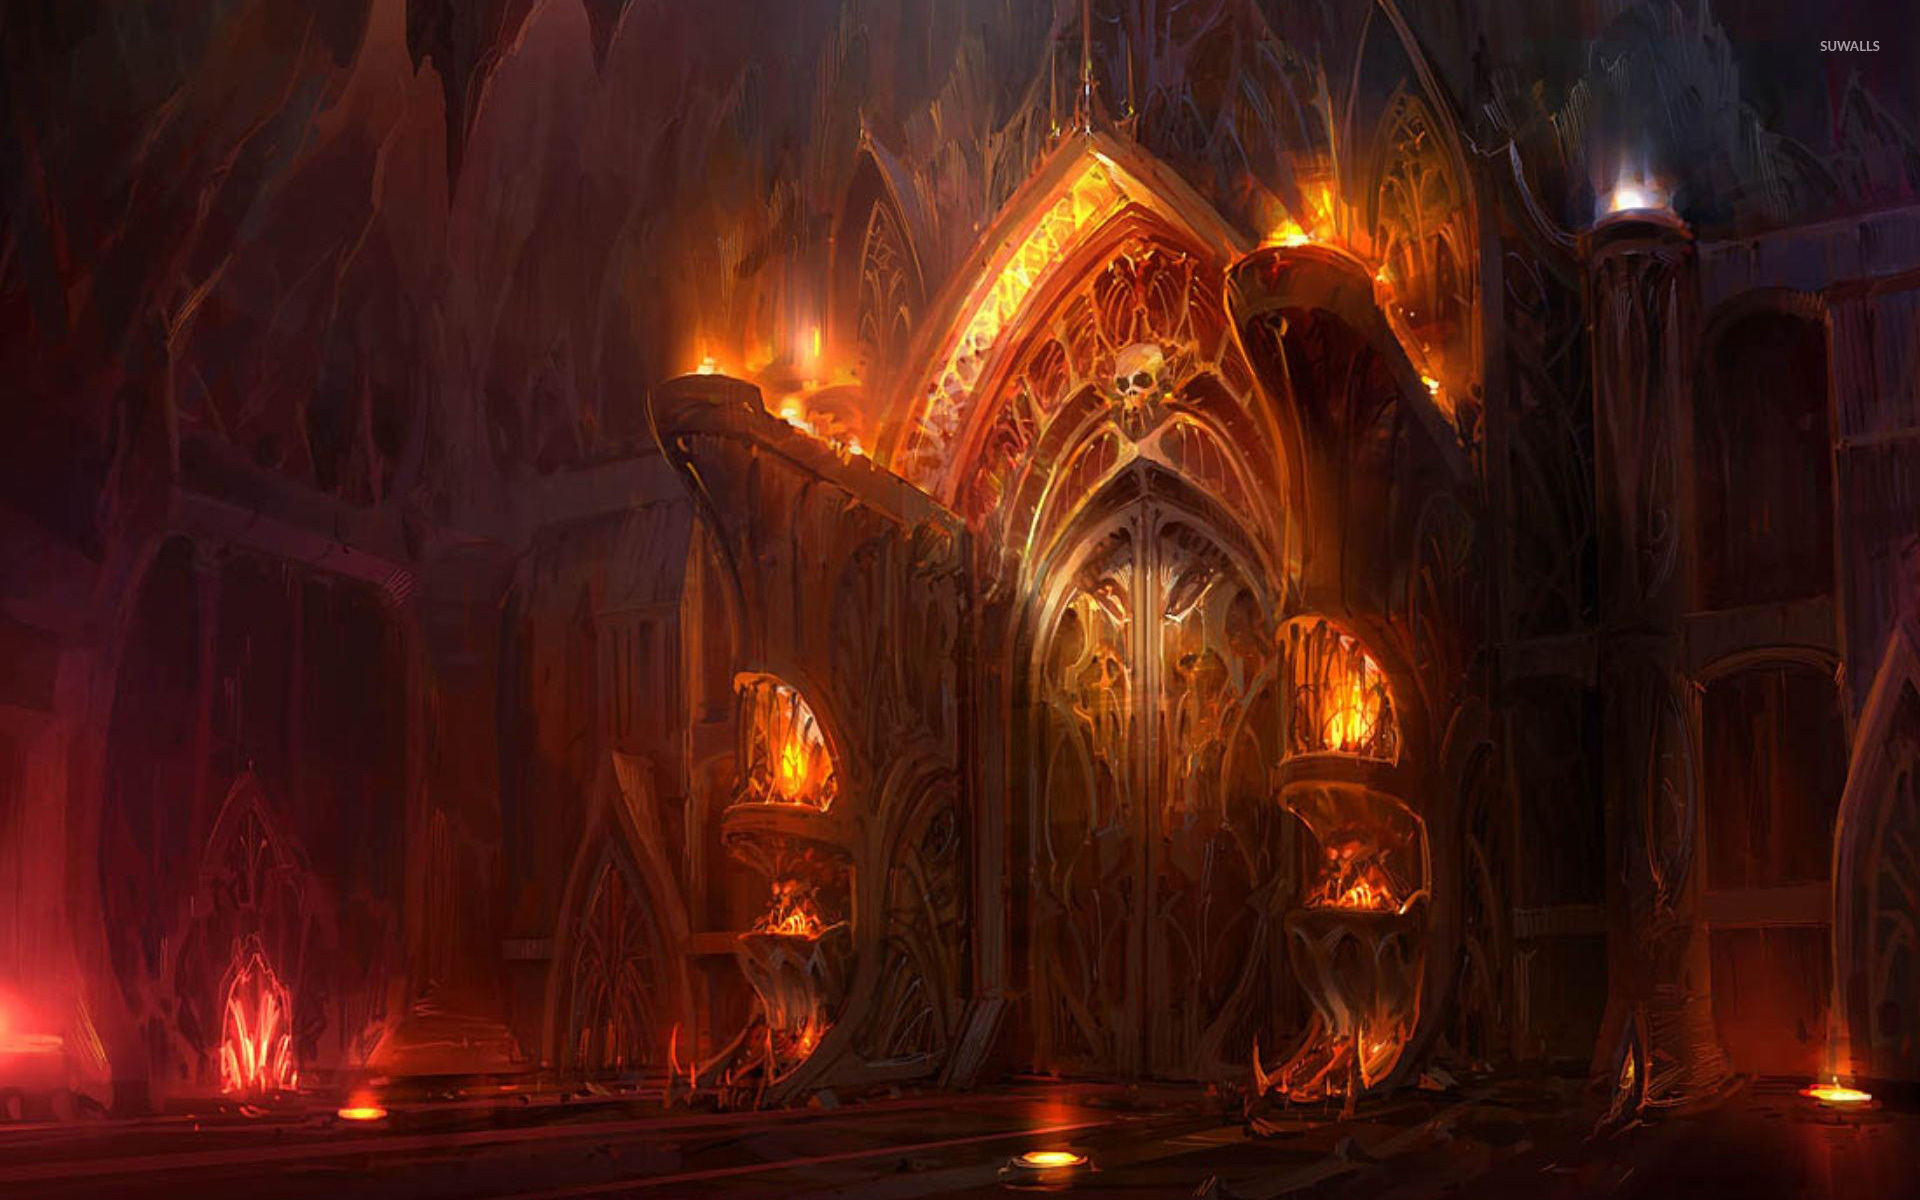 the-gates-of-hell-8476-1920x1200.jpg